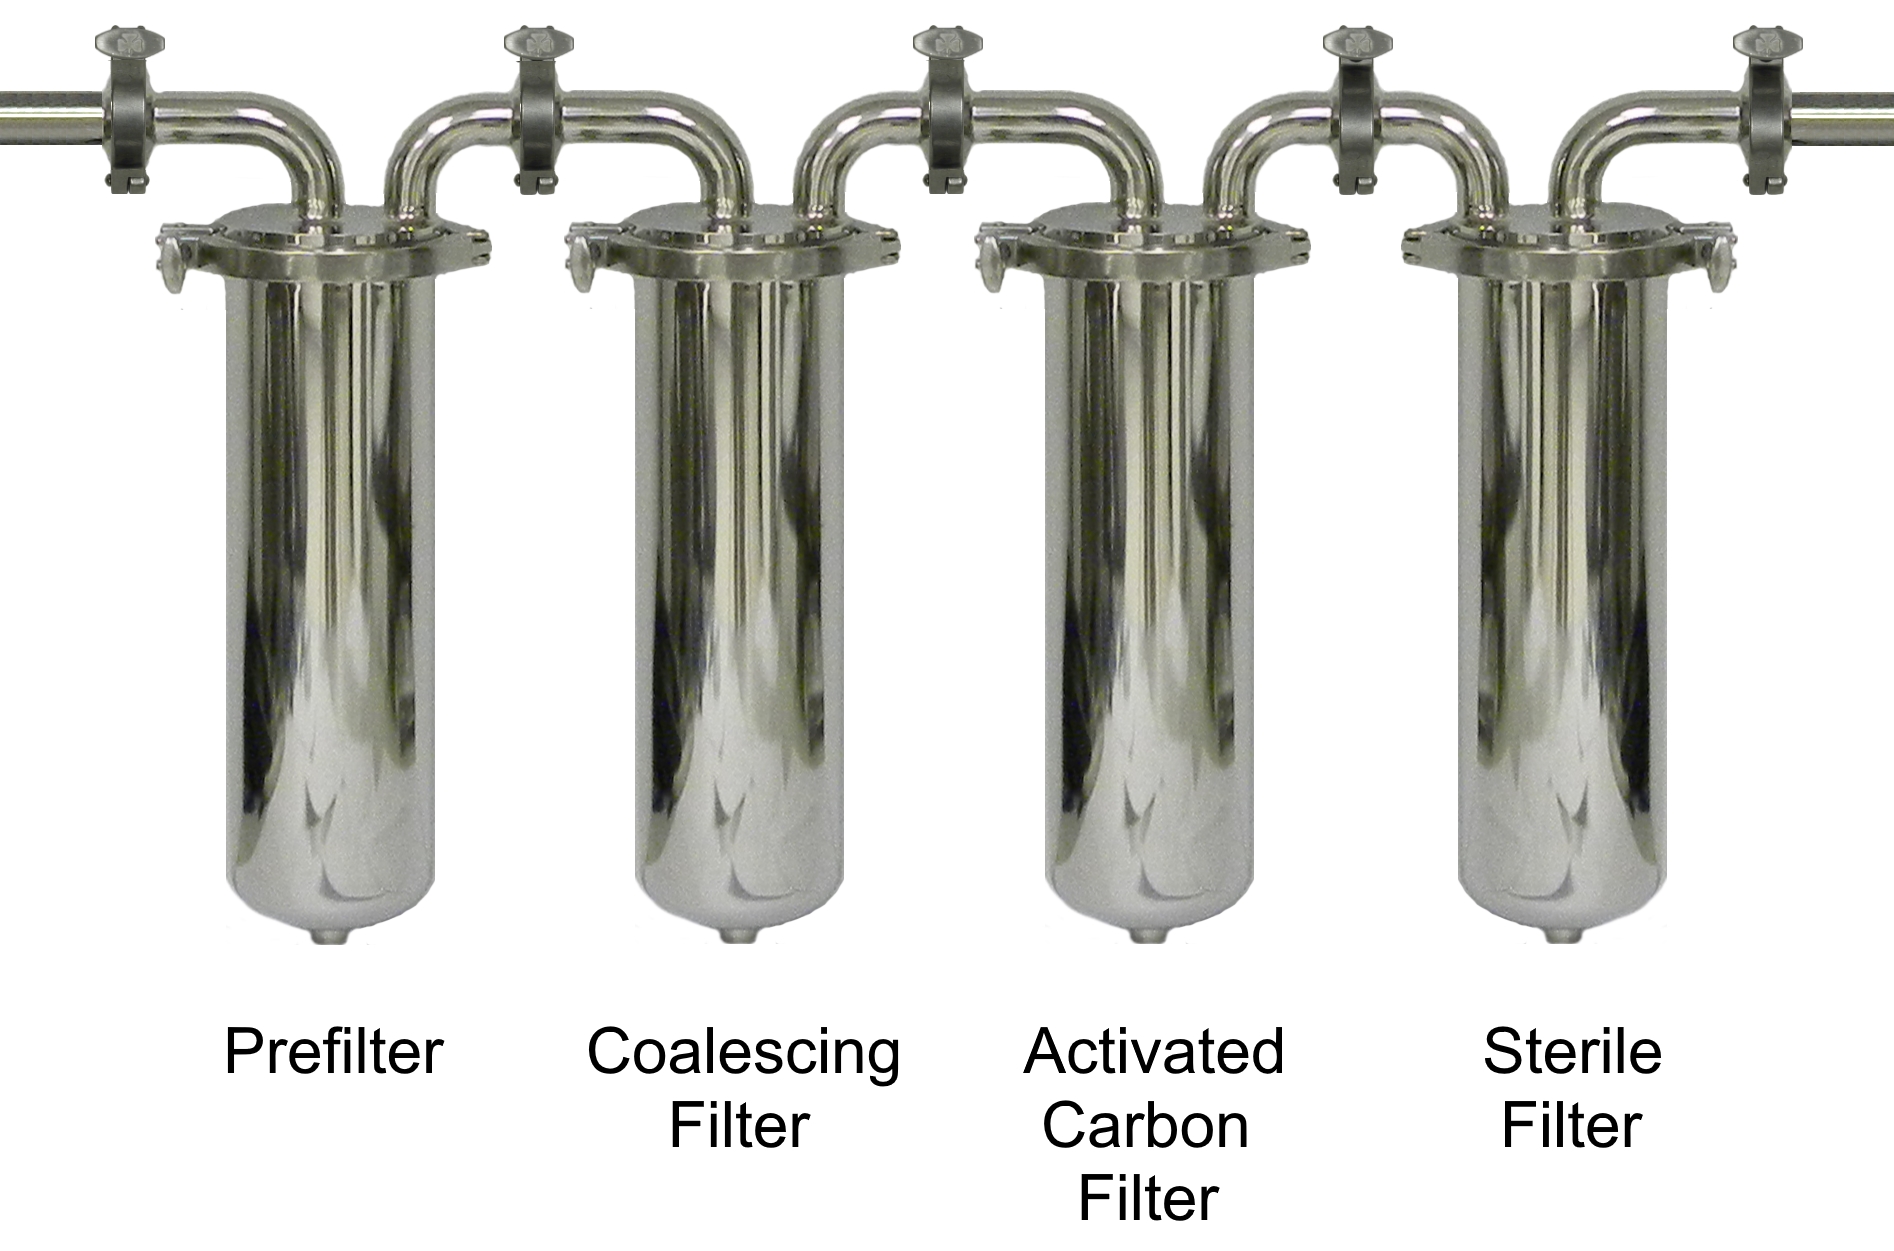 Sanitary Industrial Filters, Including Sterile Filter